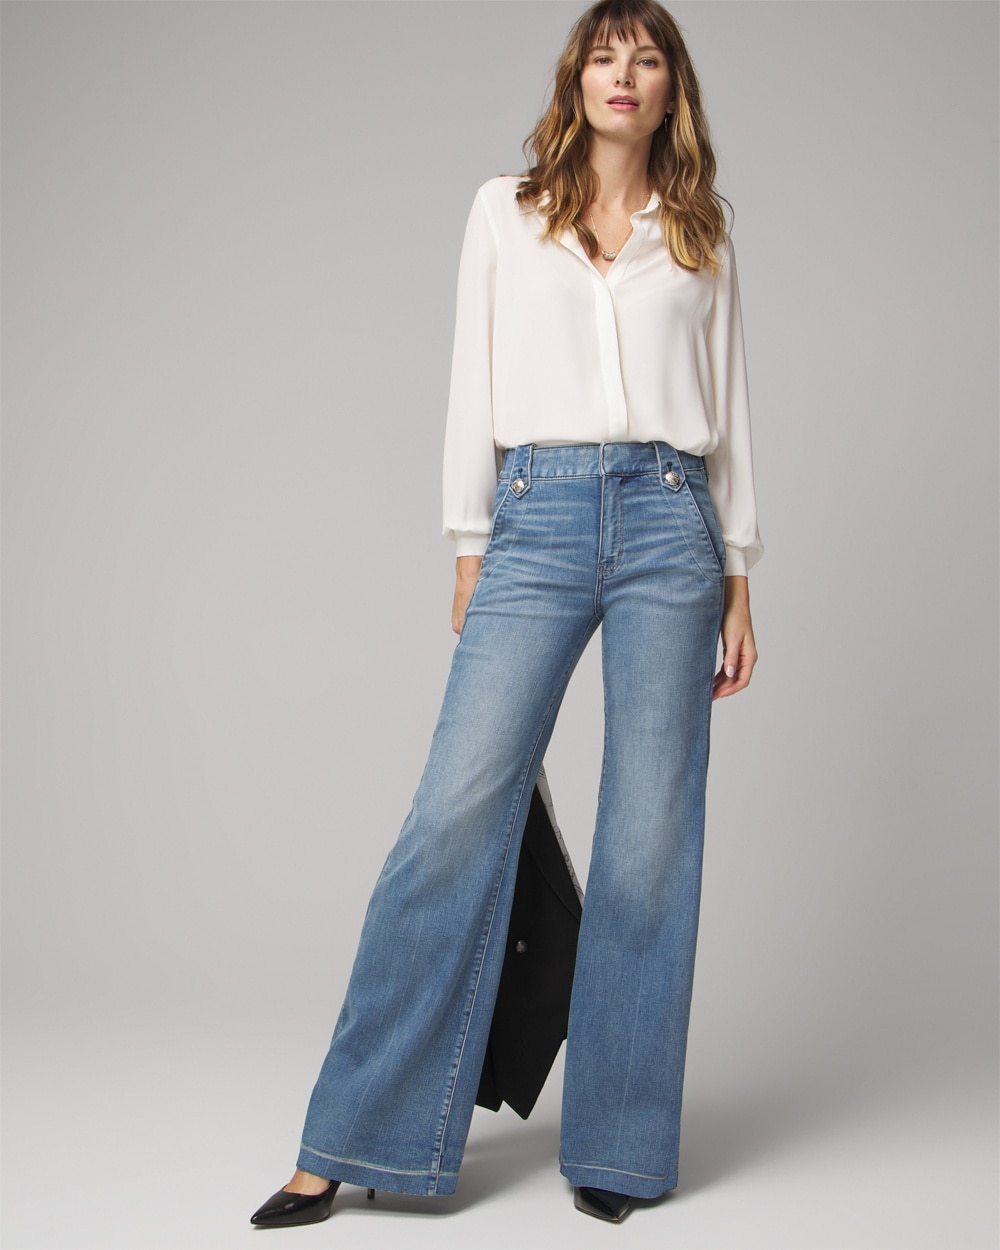 White House Black Market High-rise Every Day Soft Novelty Button Wide-leg Pants In Medium Wash Denim